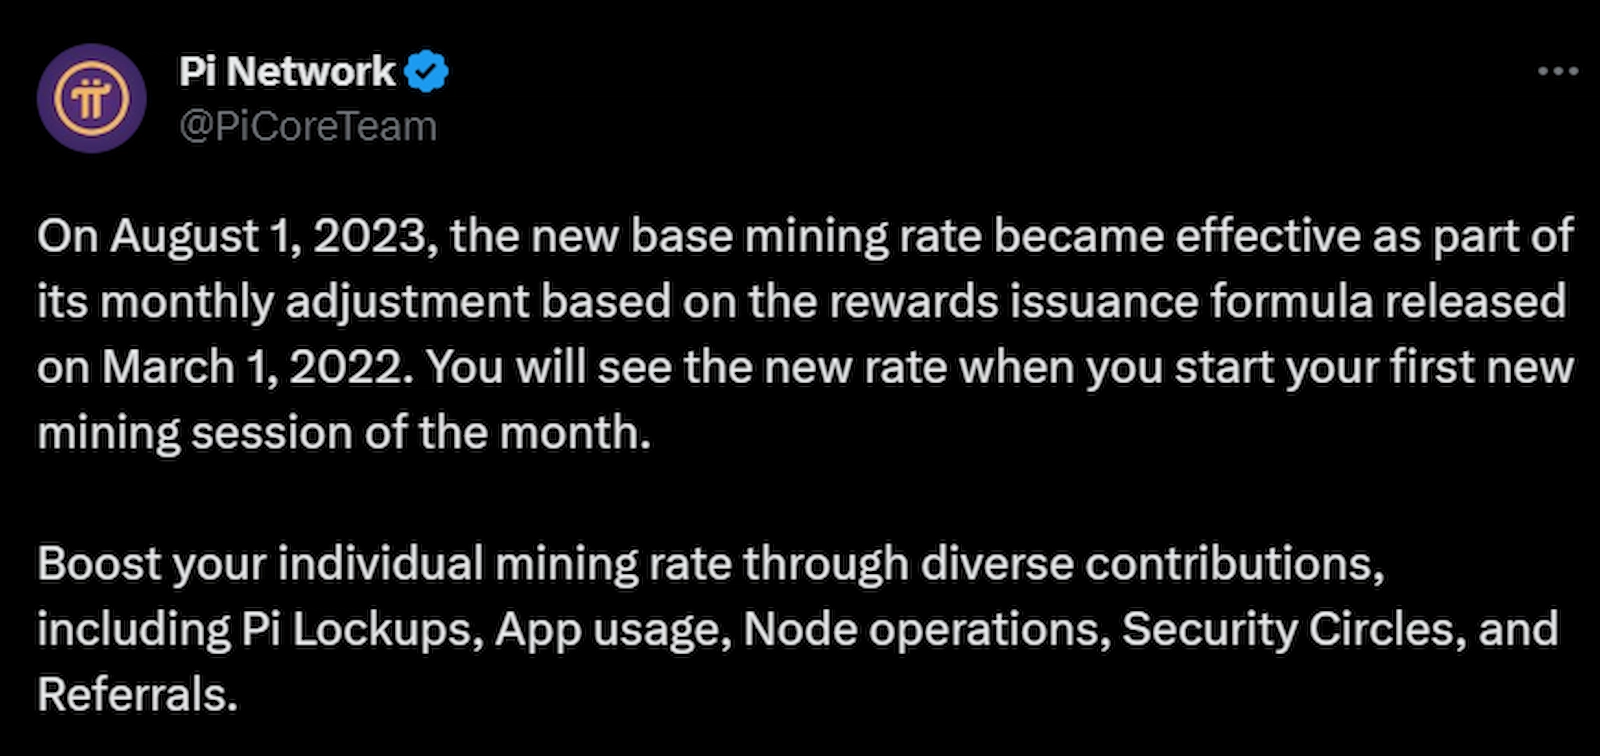 Pi Network announced the base mining rate adjustment for August